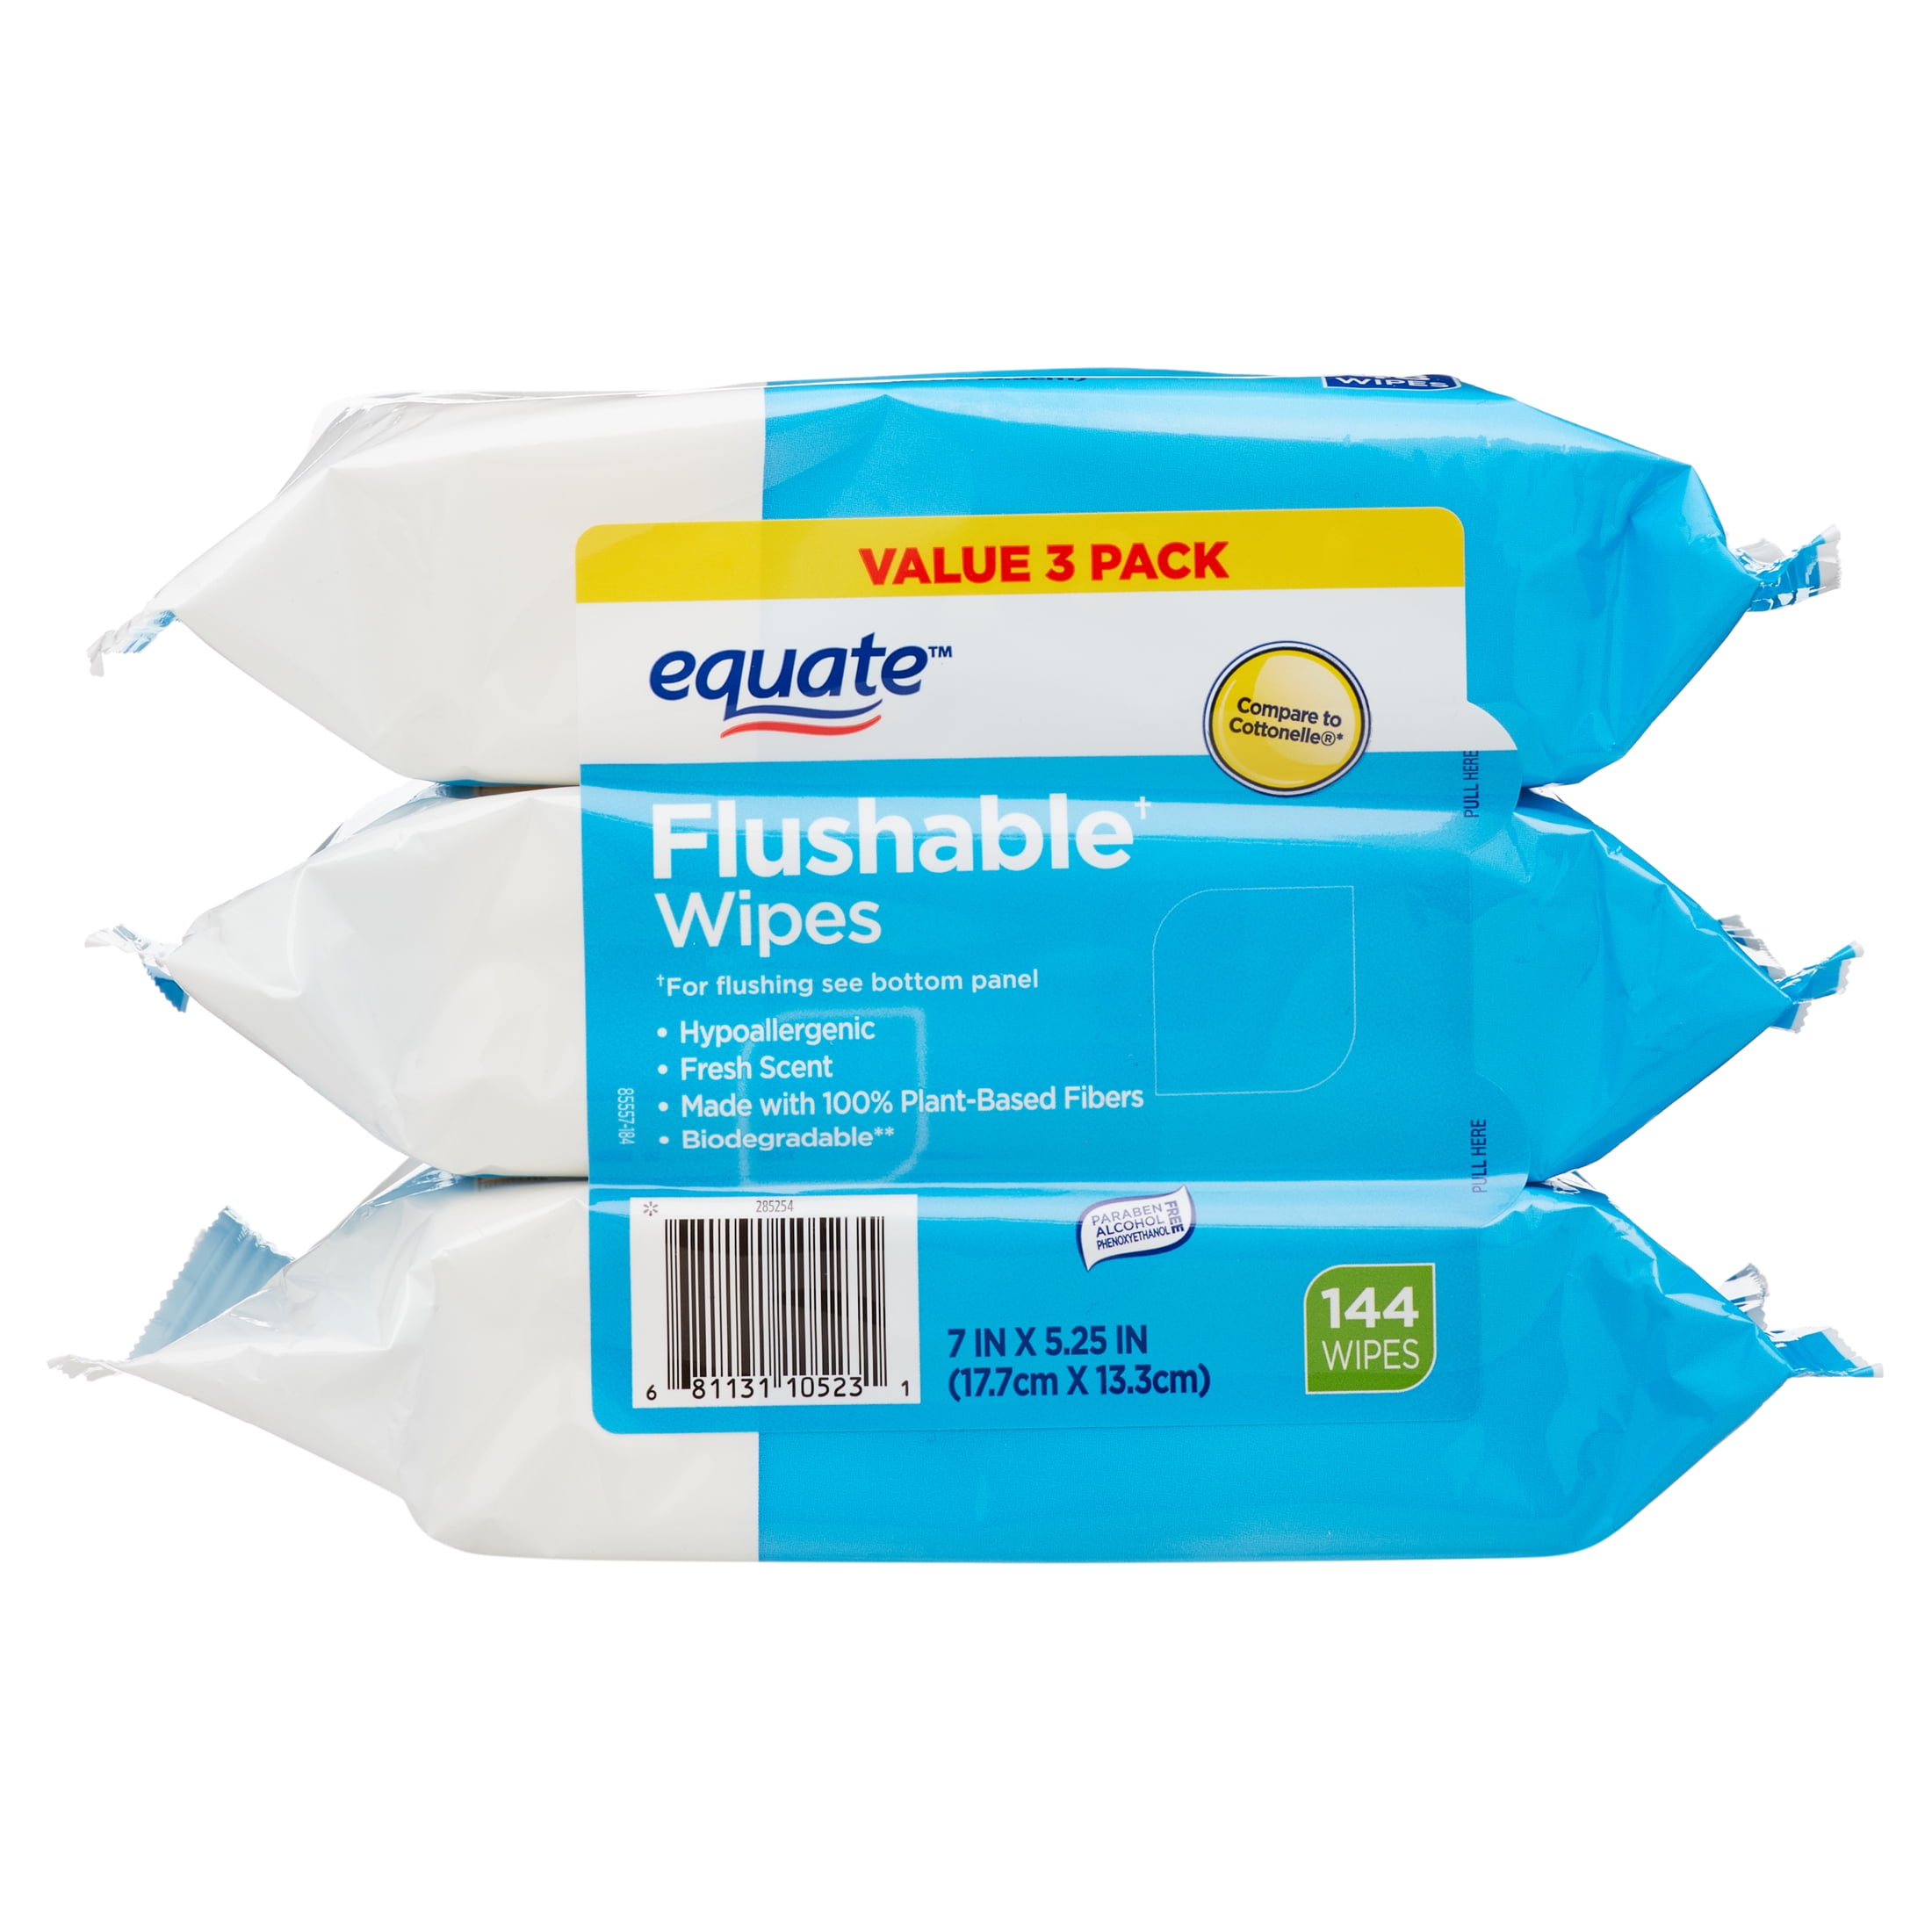 Fresh Scent 240 wipes total Equate Flushable Wipes 5 packs of 48 wipes 